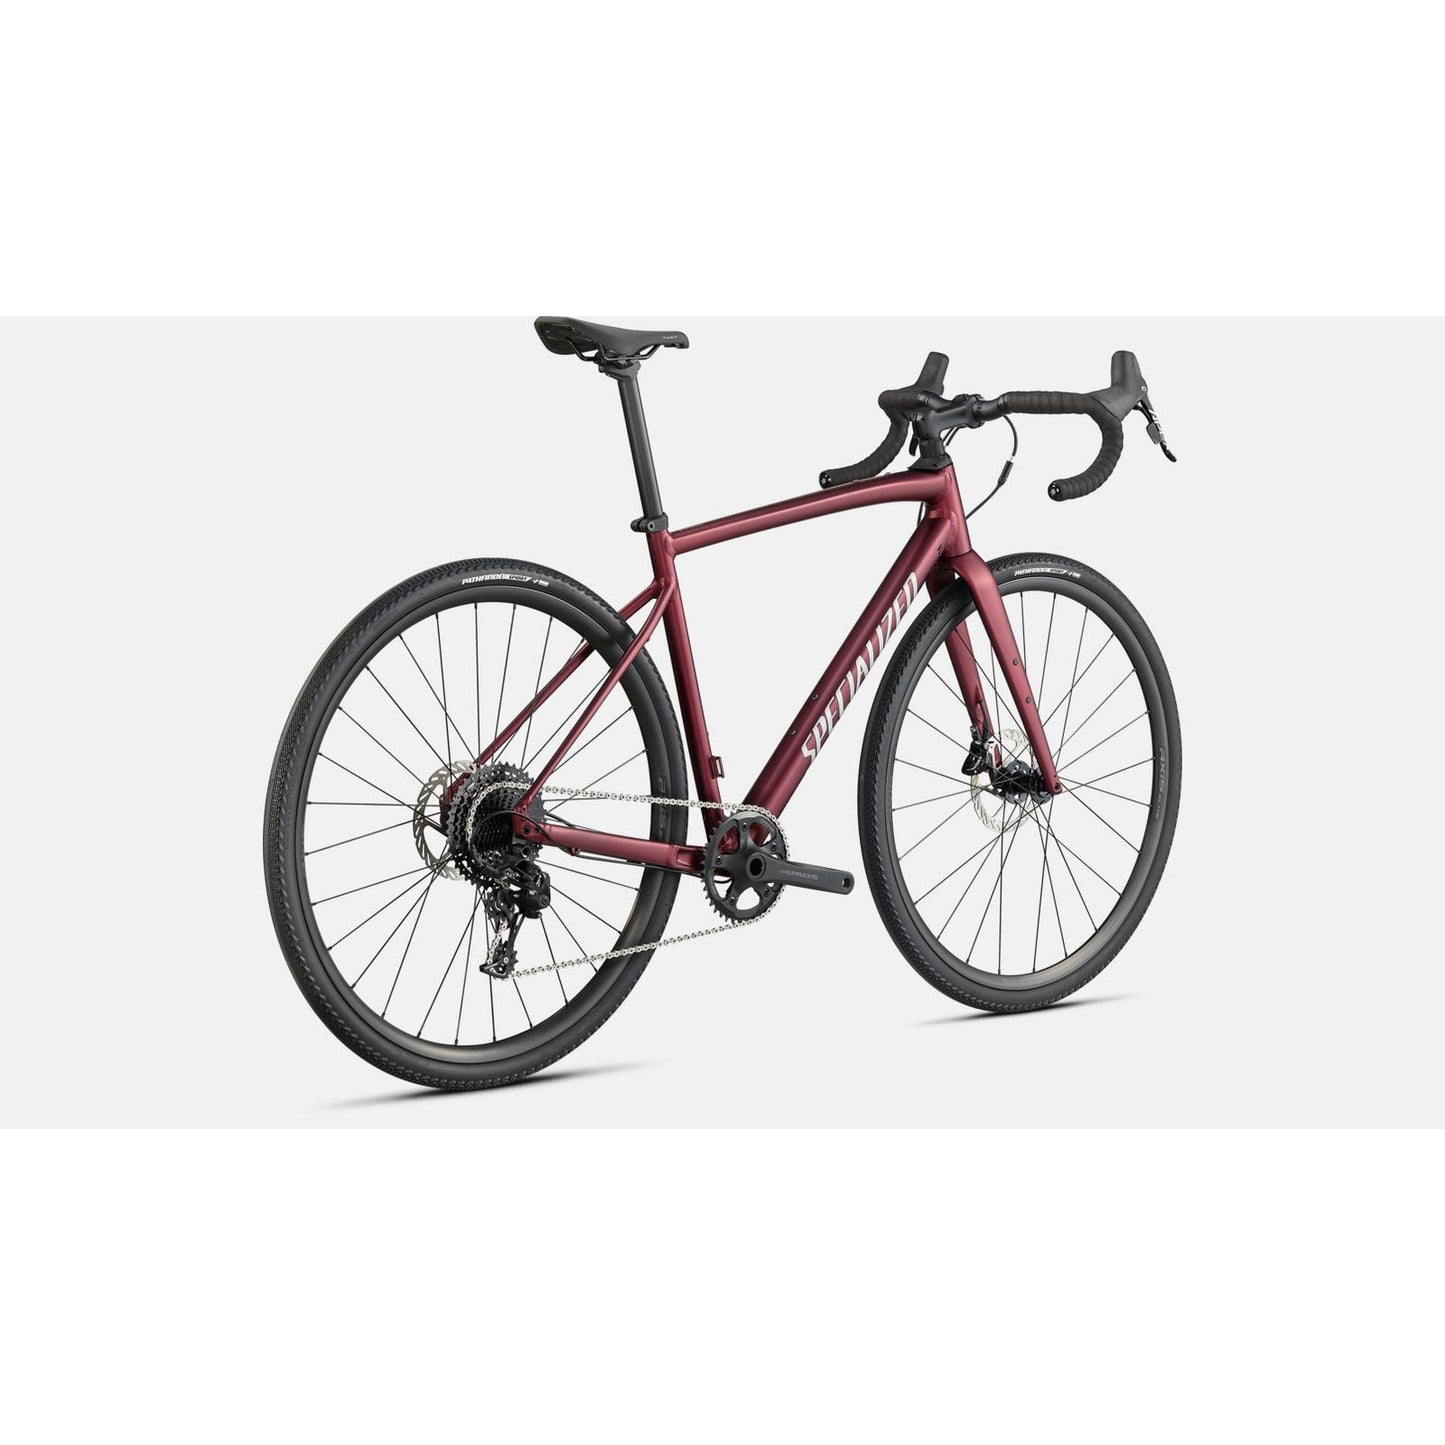 Specialized Diverge Comp E5 Gravel Road Bike - Bikes - Bicycle Warehouse